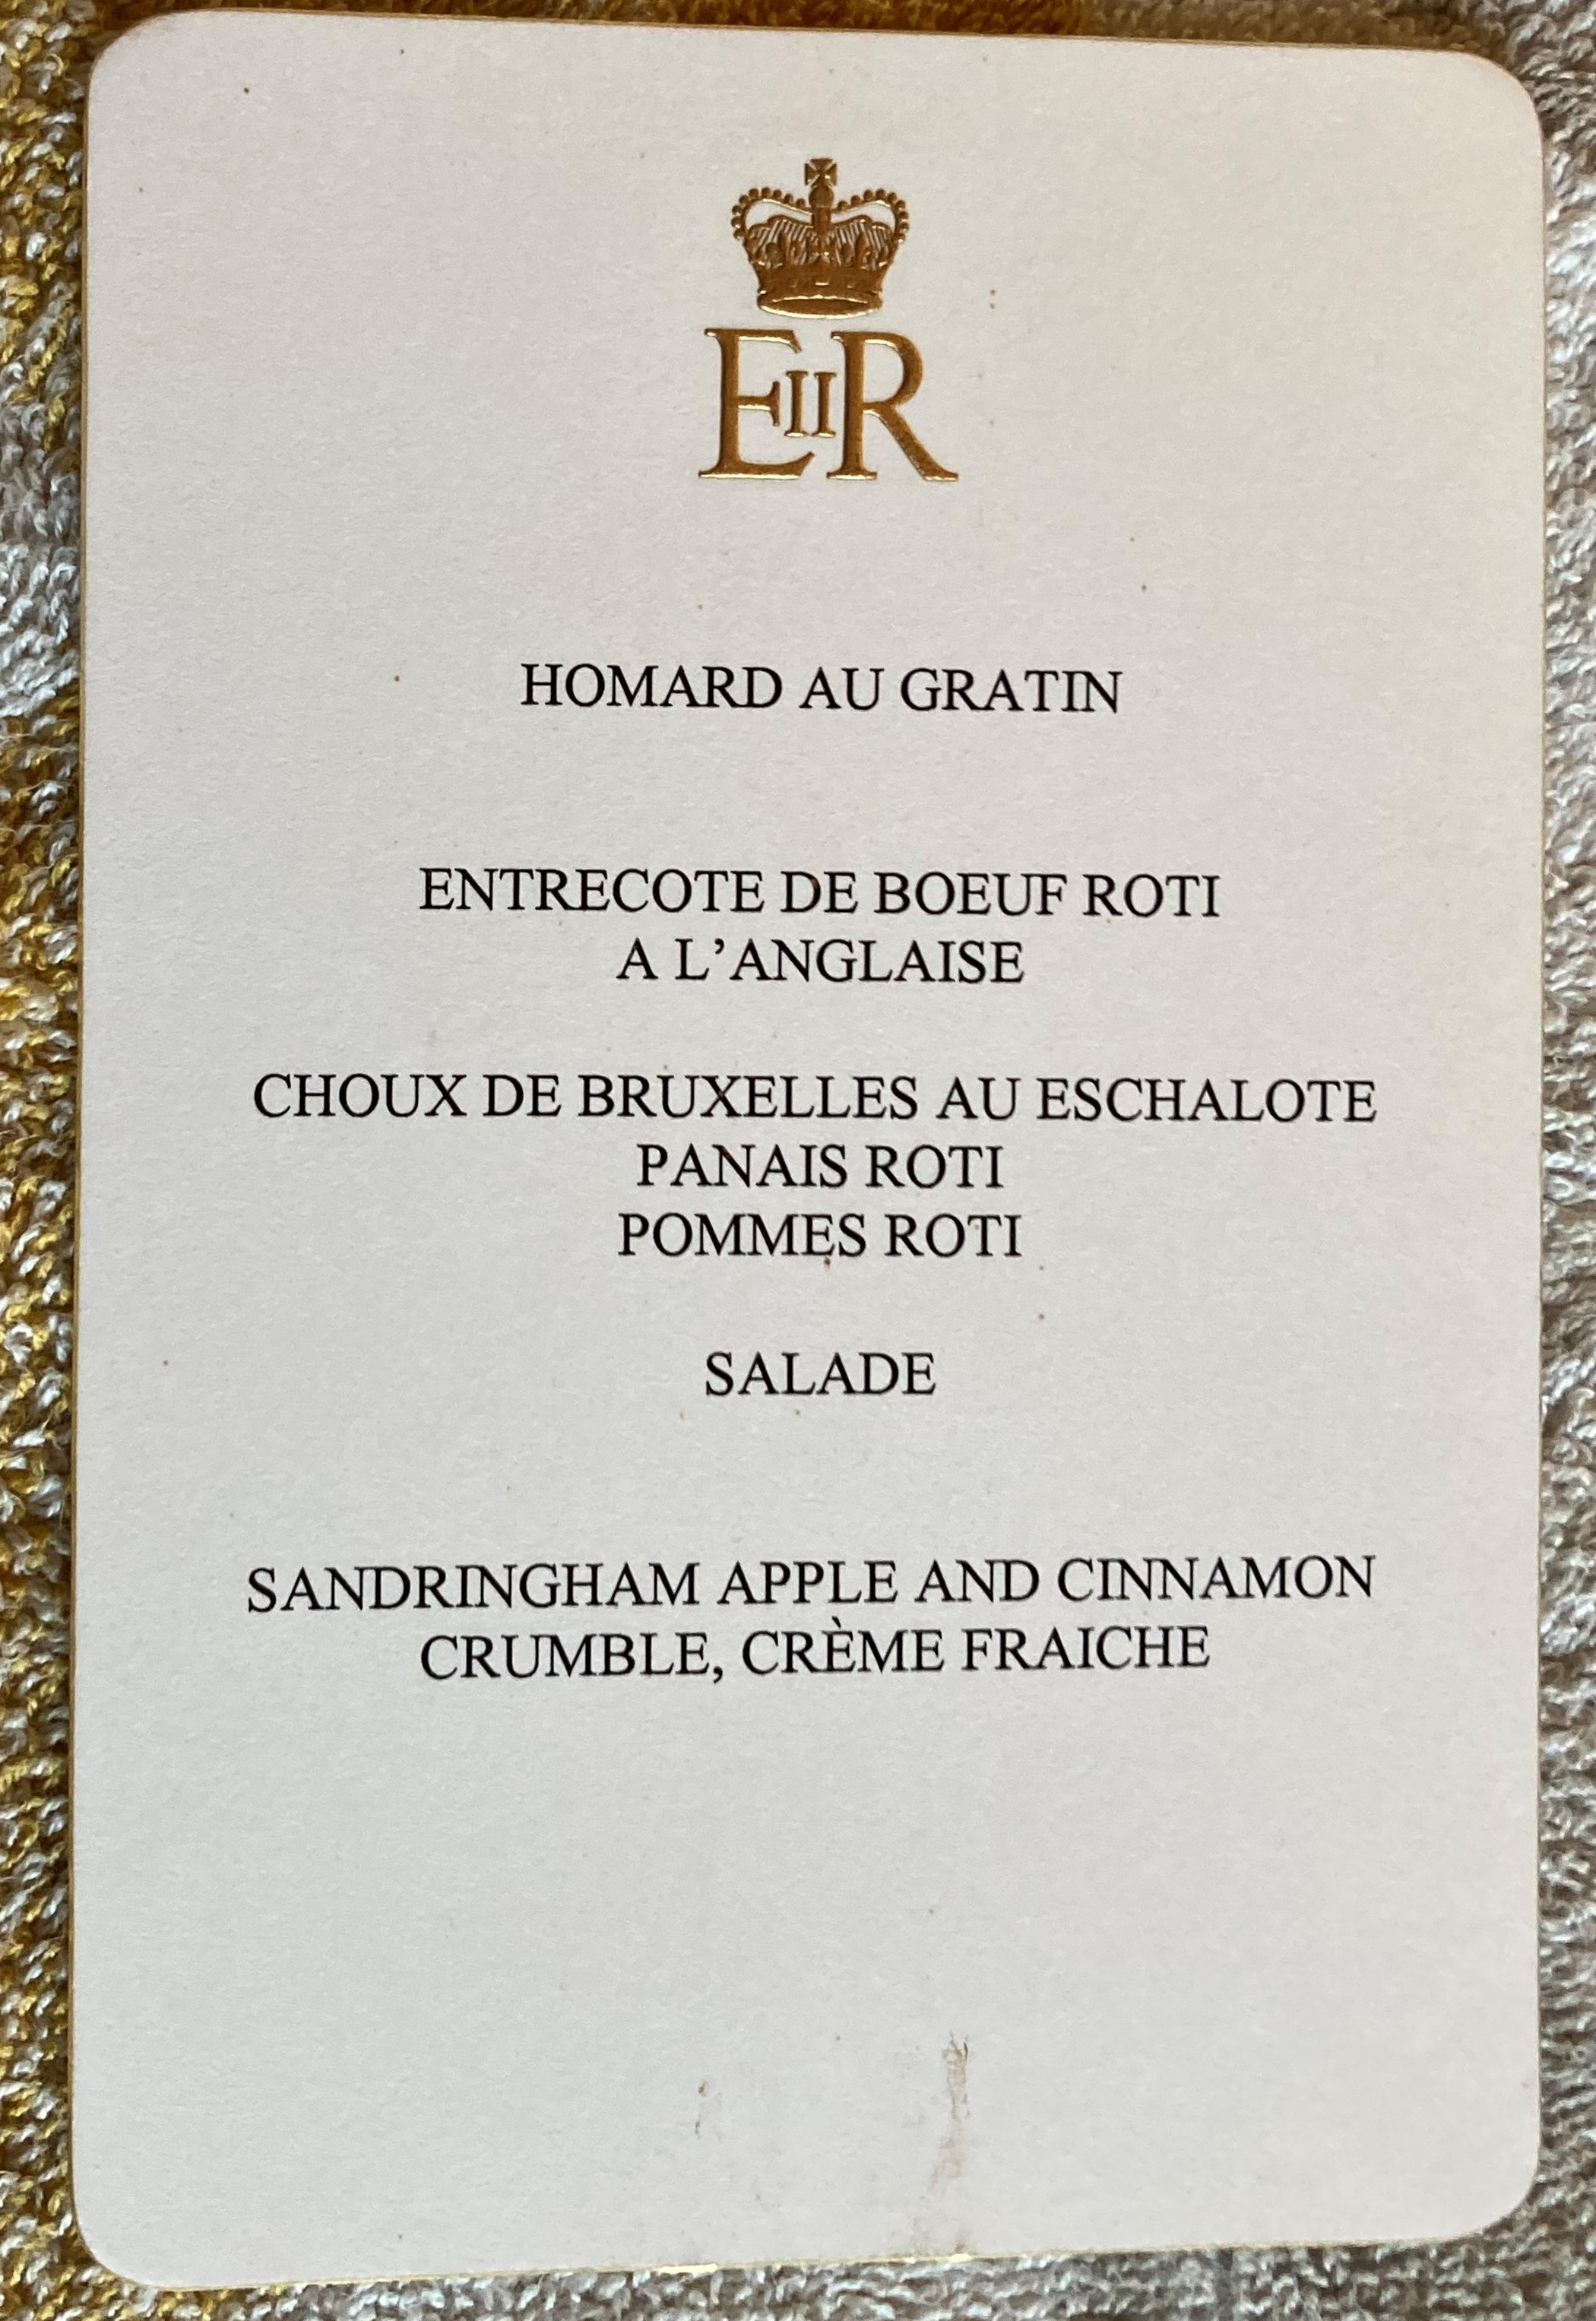 Queen Elizabeth II Sandringham house dinner menu with raised embossed gold logo from collection of